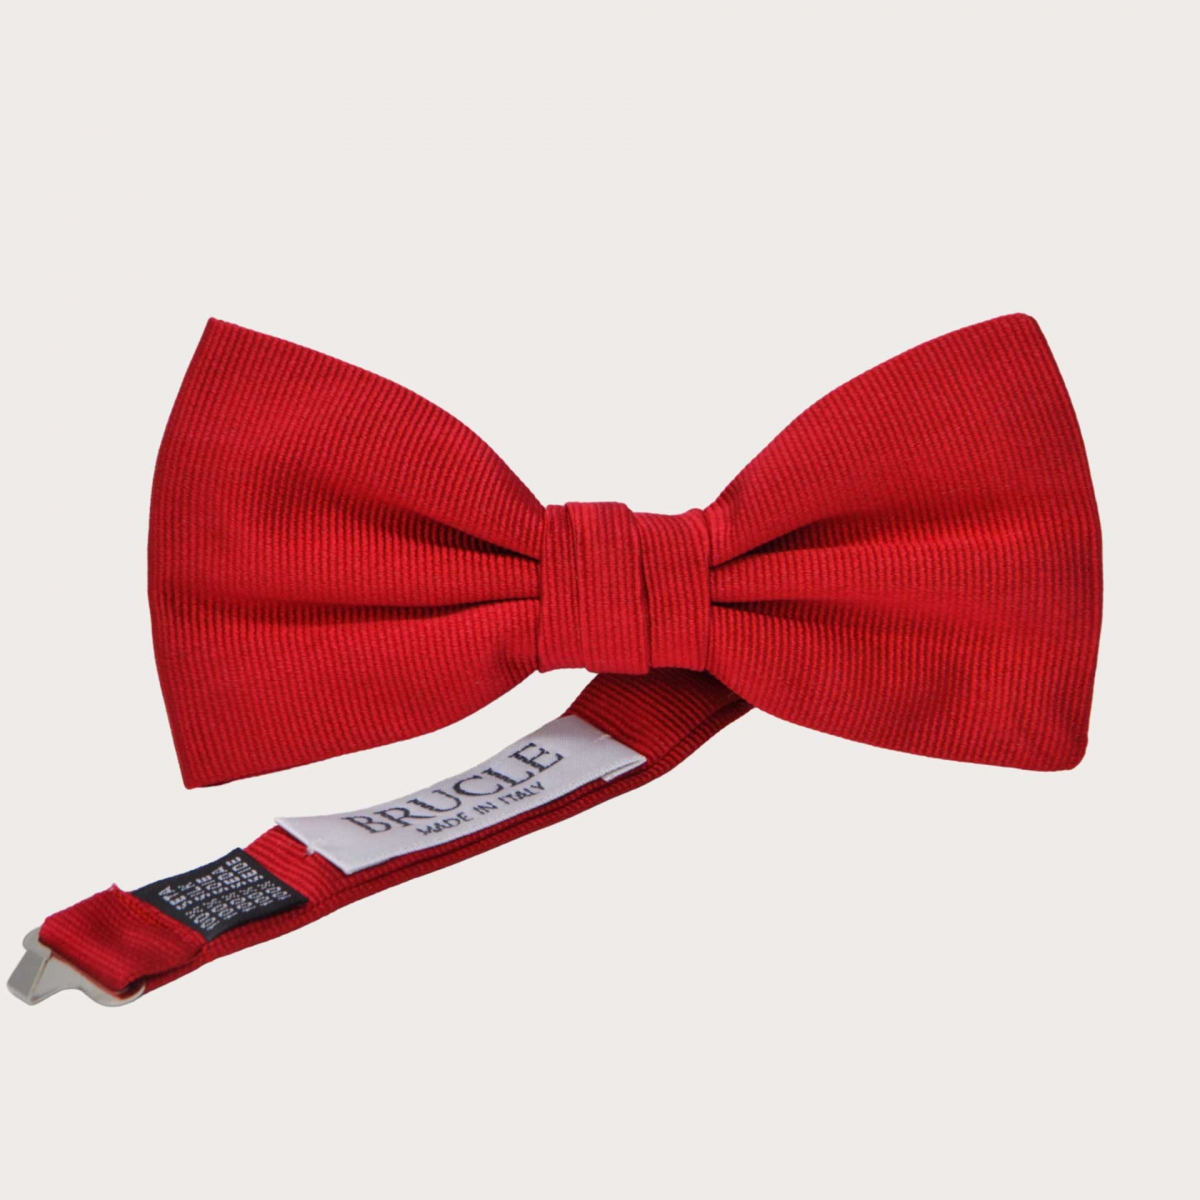 Brucle Silk Pre-tied Bow Tie red made in italy